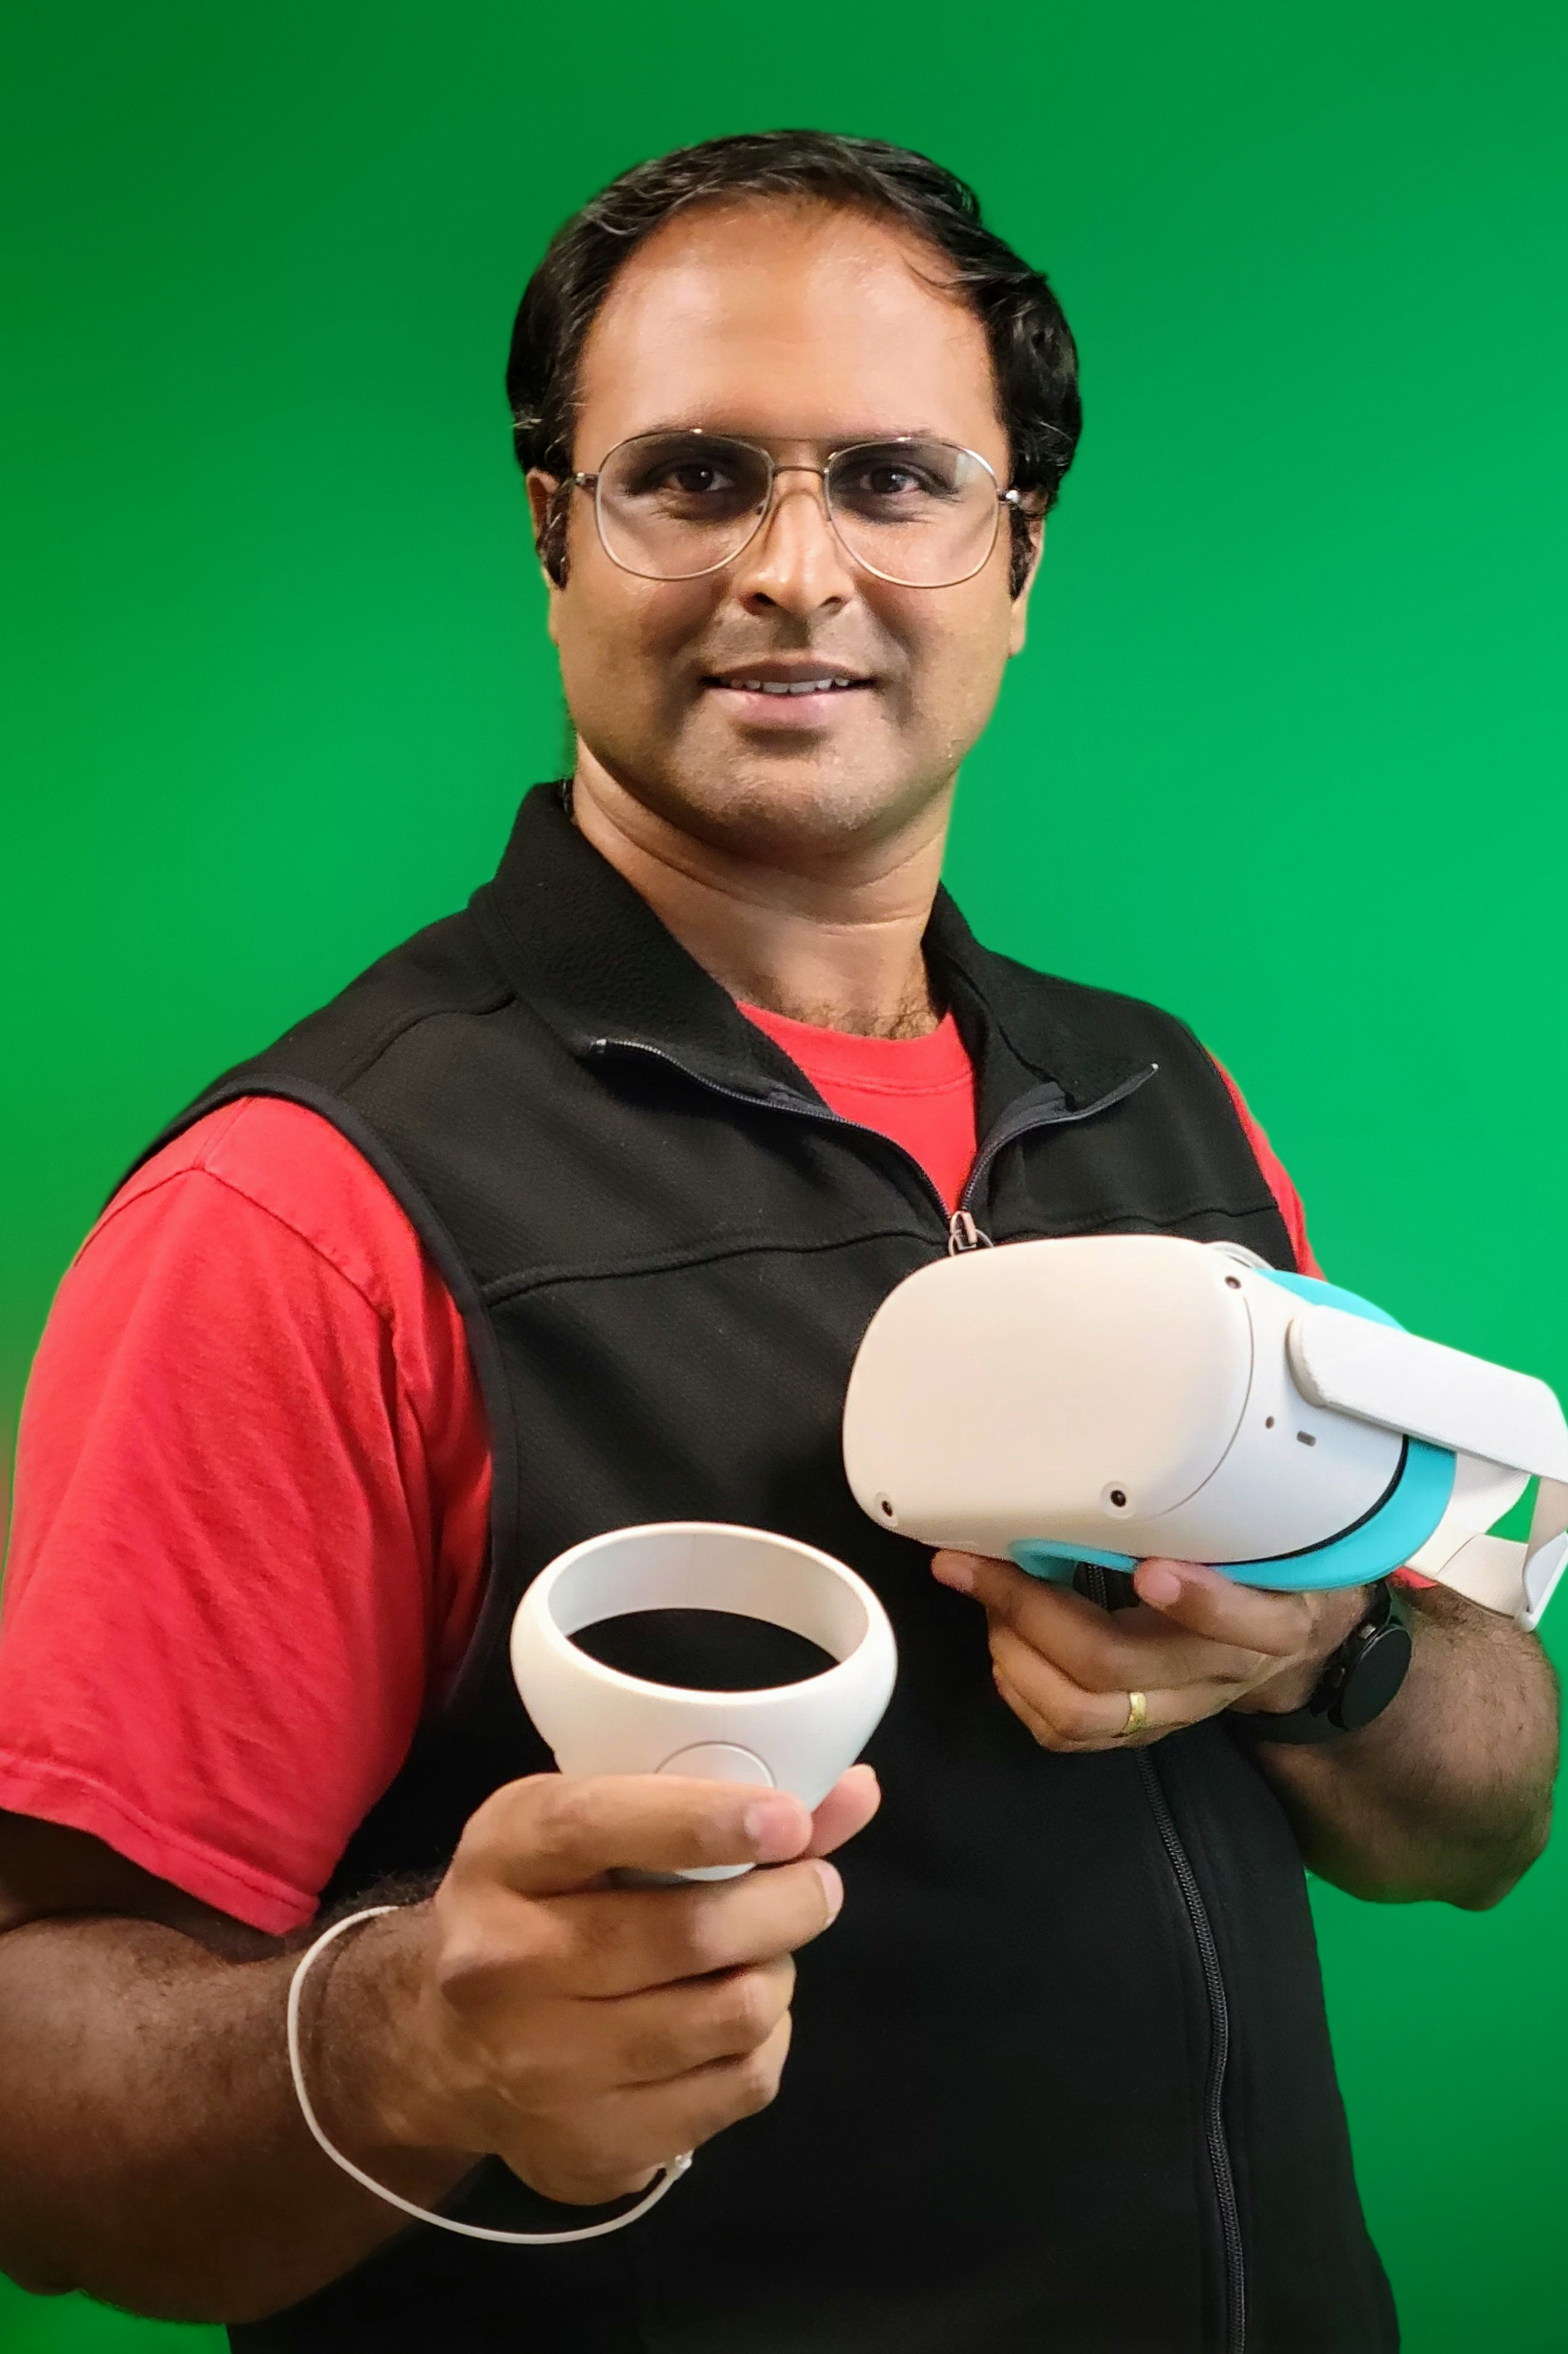 Arun Ramakrishnan, Director of Research Labs, standing in front of a green screen and holding virtual reality googles.